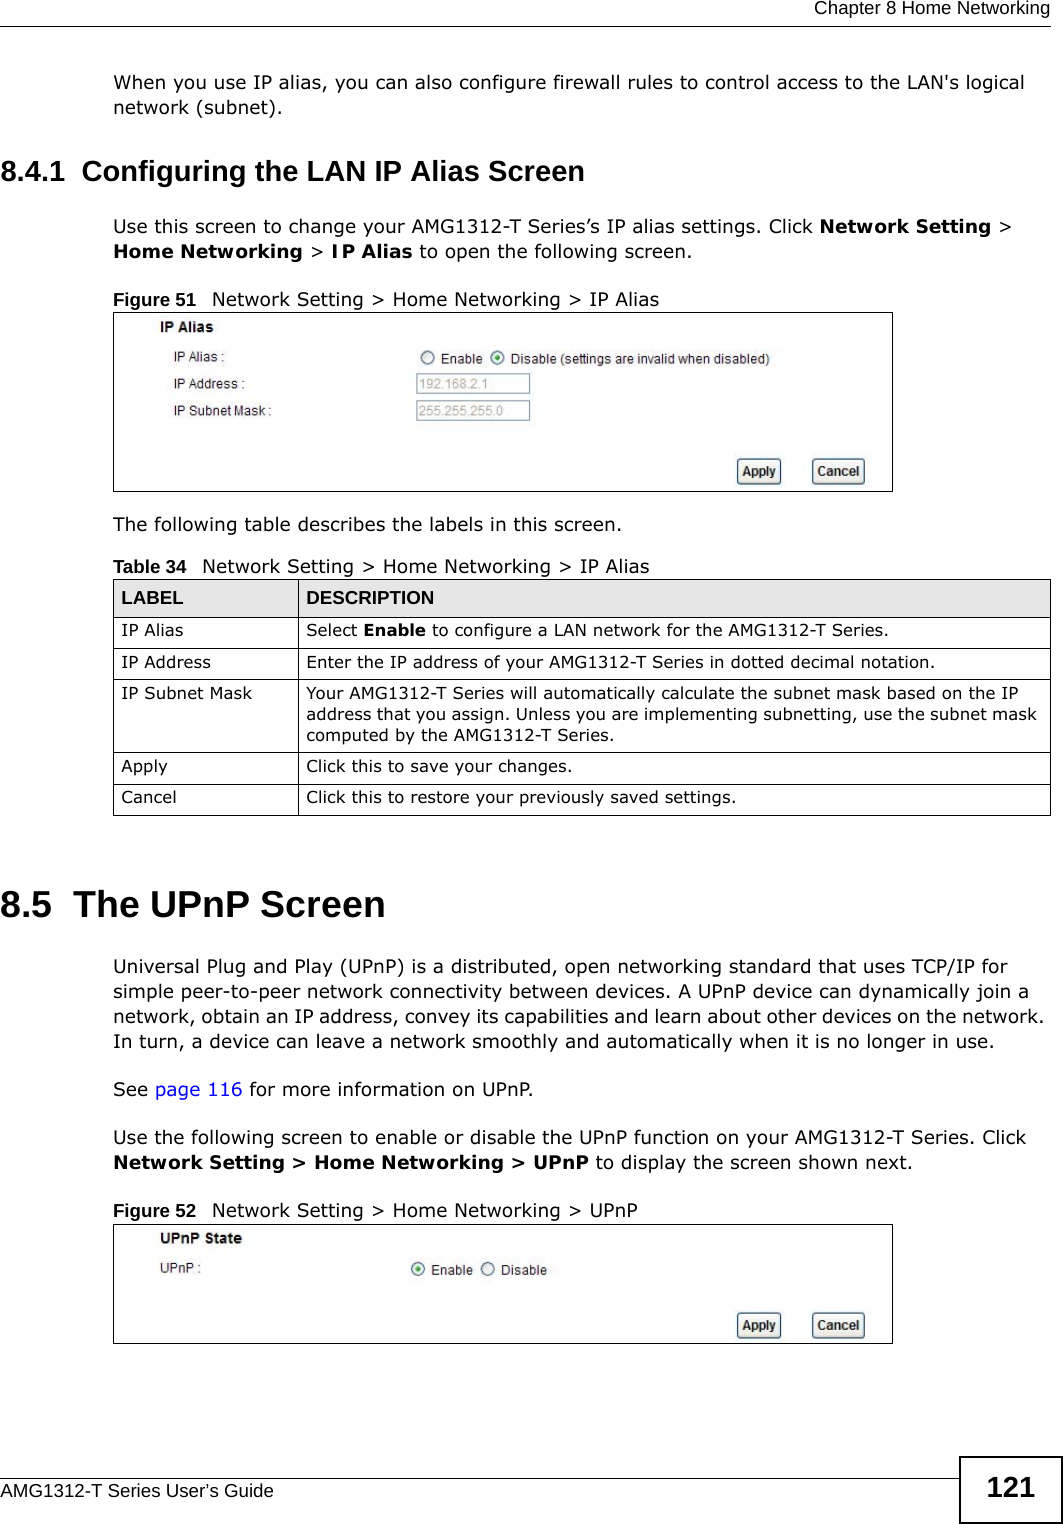  Chapter 8 Home NetworkingAMG1312-T Series User’s Guide 121When you use IP alias, you can also configure firewall rules to control access to the LAN&apos;s logical network (subnet).8.4.1  Configuring the LAN IP Alias ScreenUse this screen to change your AMG1312-T Series’s IP alias settings. Click Network Setting &gt; Home Networking &gt; IP Alias to open the following screen.Figure 51   Network Setting &gt; Home Networking &gt; IP AliasThe following table describes the labels in this screen. 8.5  The UPnP ScreenUniversal Plug and Play (UPnP) is a distributed, open networking standard that uses TCP/IP for simple peer-to-peer network connectivity between devices. A UPnP device can dynamically join a network, obtain an IP address, convey its capabilities and learn about other devices on the network. In turn, a device can leave a network smoothly and automatically when it is no longer in use.See page 116 for more information on UPnP.Use the following screen to enable or disable the UPnP function on your AMG1312-T Series. Click Network Setting &gt; Home Networking &gt; UPnP to display the screen shown next.Figure 52   Network Setting &gt; Home Networking &gt; UPnPTable 34   Network Setting &gt; Home Networking &gt; IP Alias LABEL DESCRIPTIONIP Alias  Select Enable to configure a LAN network for the AMG1312-T Series.IP Address Enter the IP address of your AMG1312-T Series in dotted decimal notation. IP Subnet Mask Your AMG1312-T Series will automatically calculate the subnet mask based on the IP address that you assign. Unless you are implementing subnetting, use the subnet mask computed by the AMG1312-T Series.Apply Click this to save your changes.Cancel Click this to restore your previously saved settings.